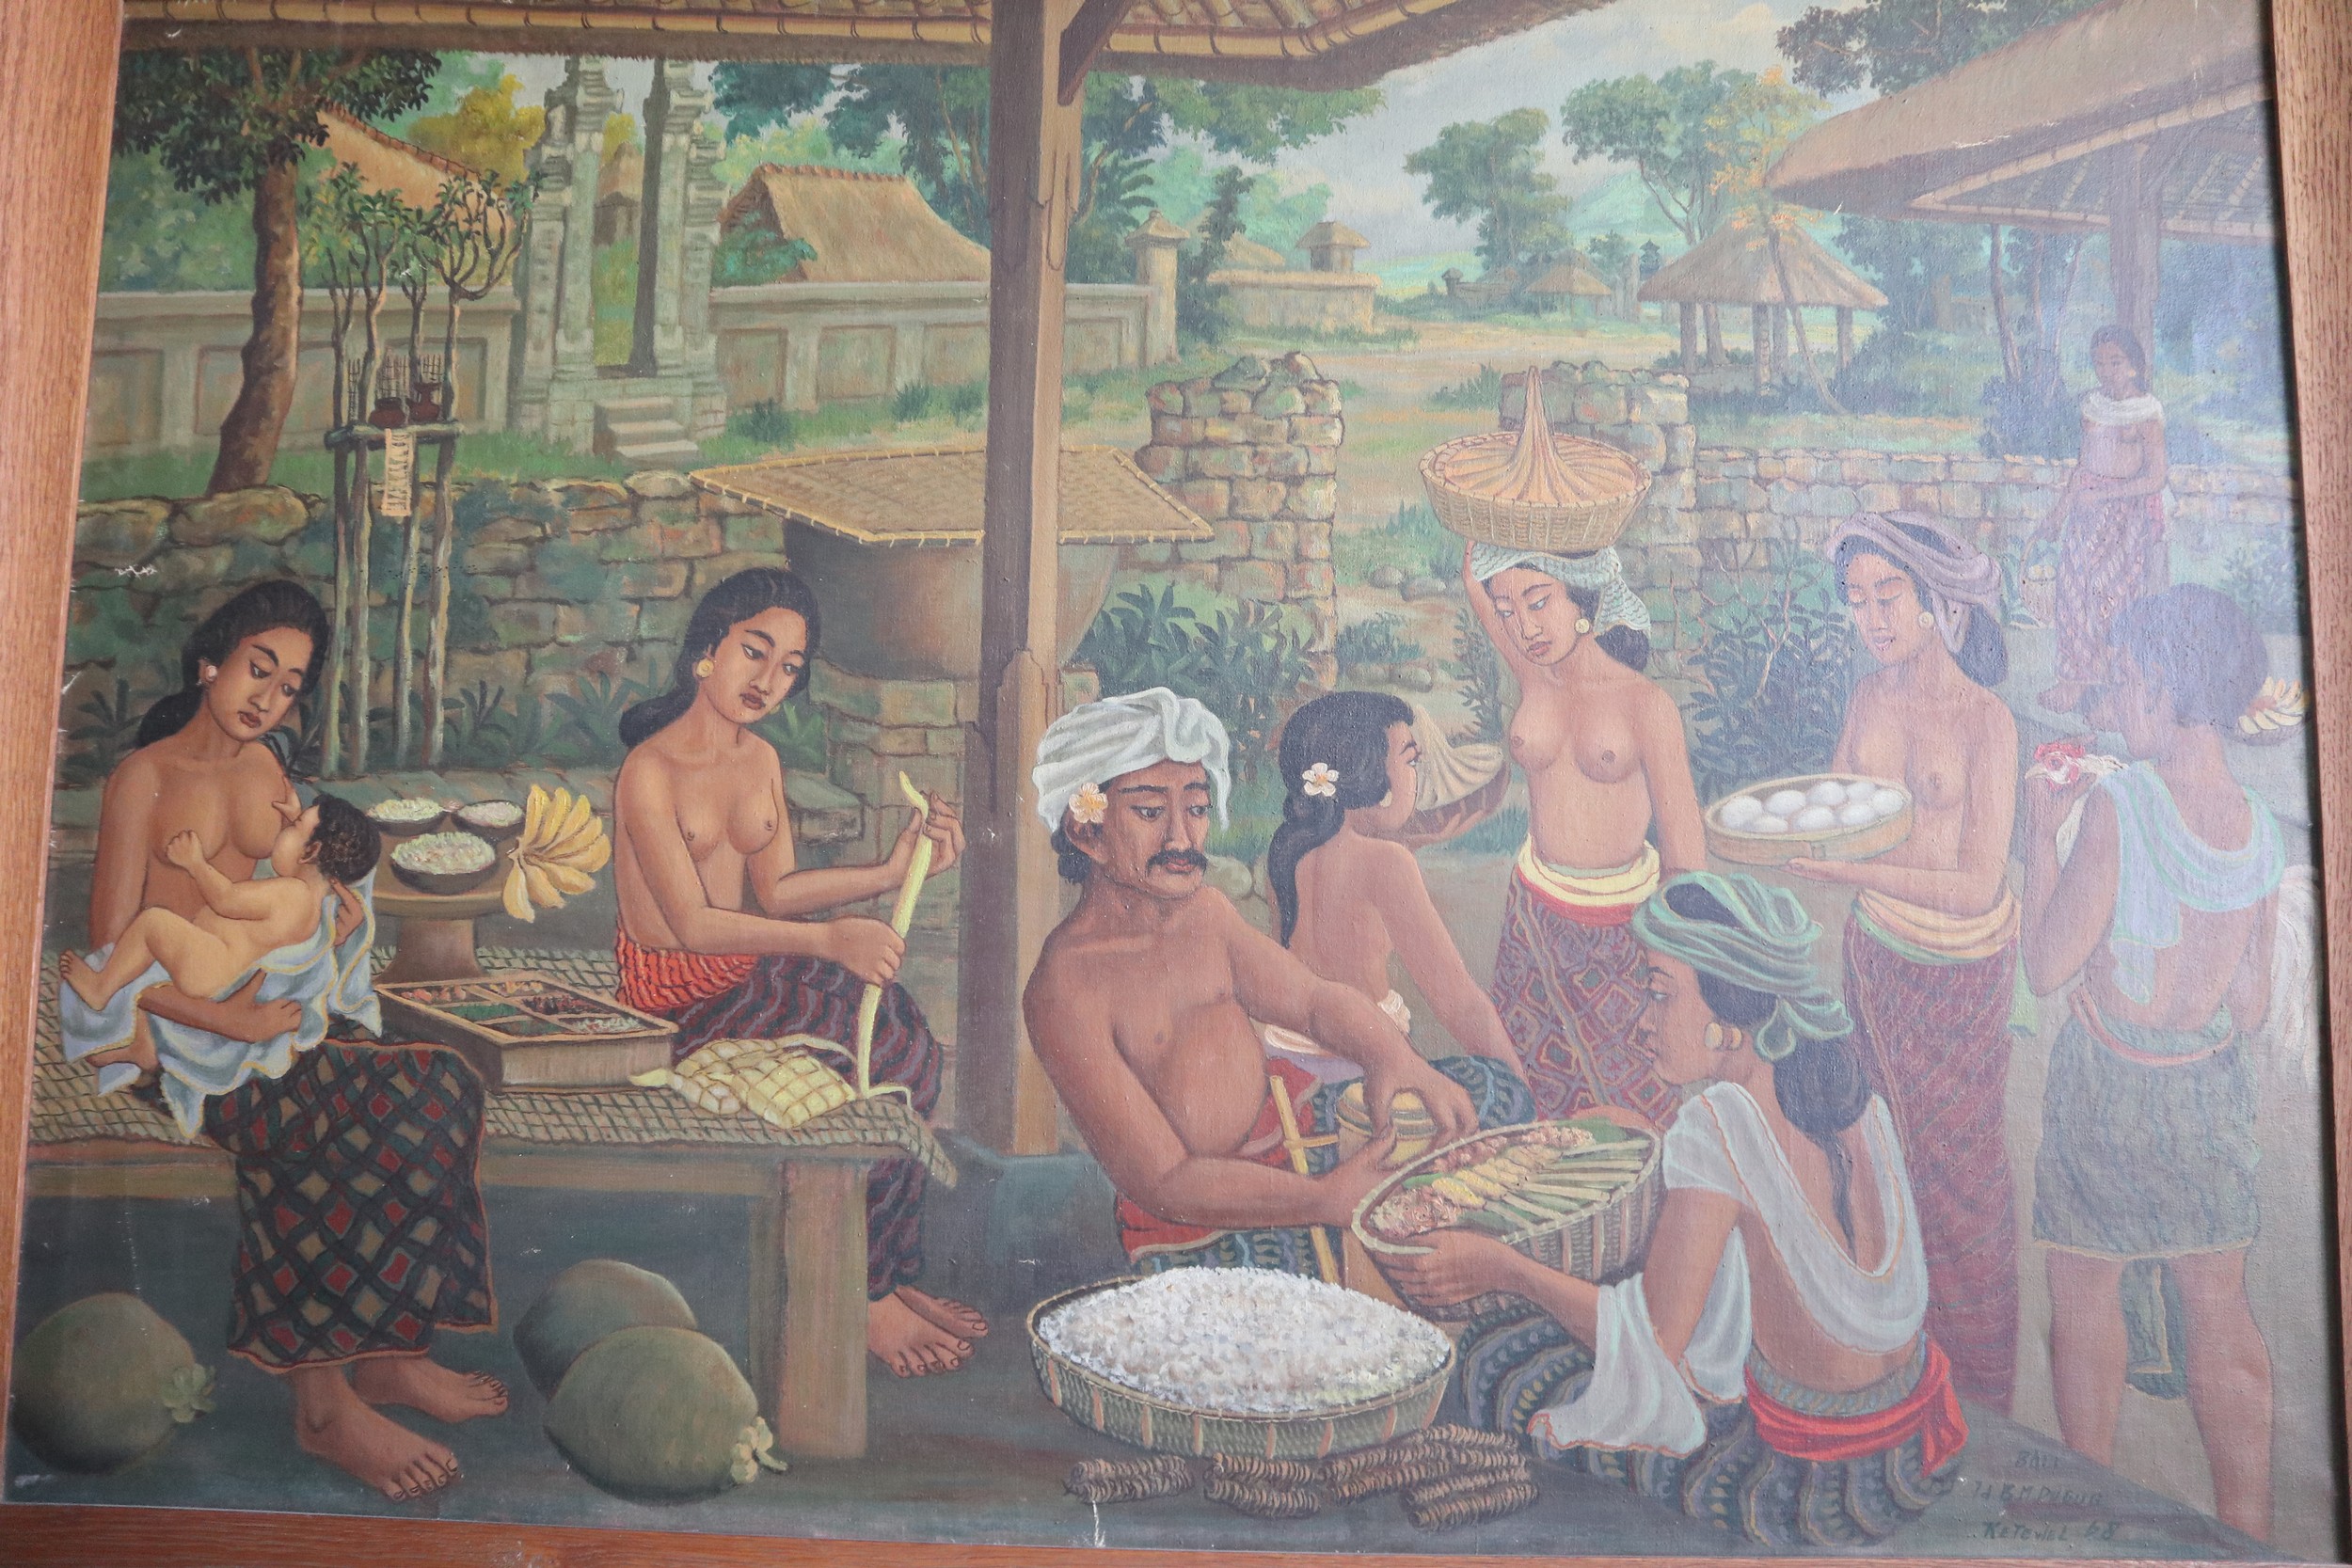 Jd B M Pubug Ketewel, '68: oil on canvas, Bali harvest scene with figures in a village, 30" x 44",